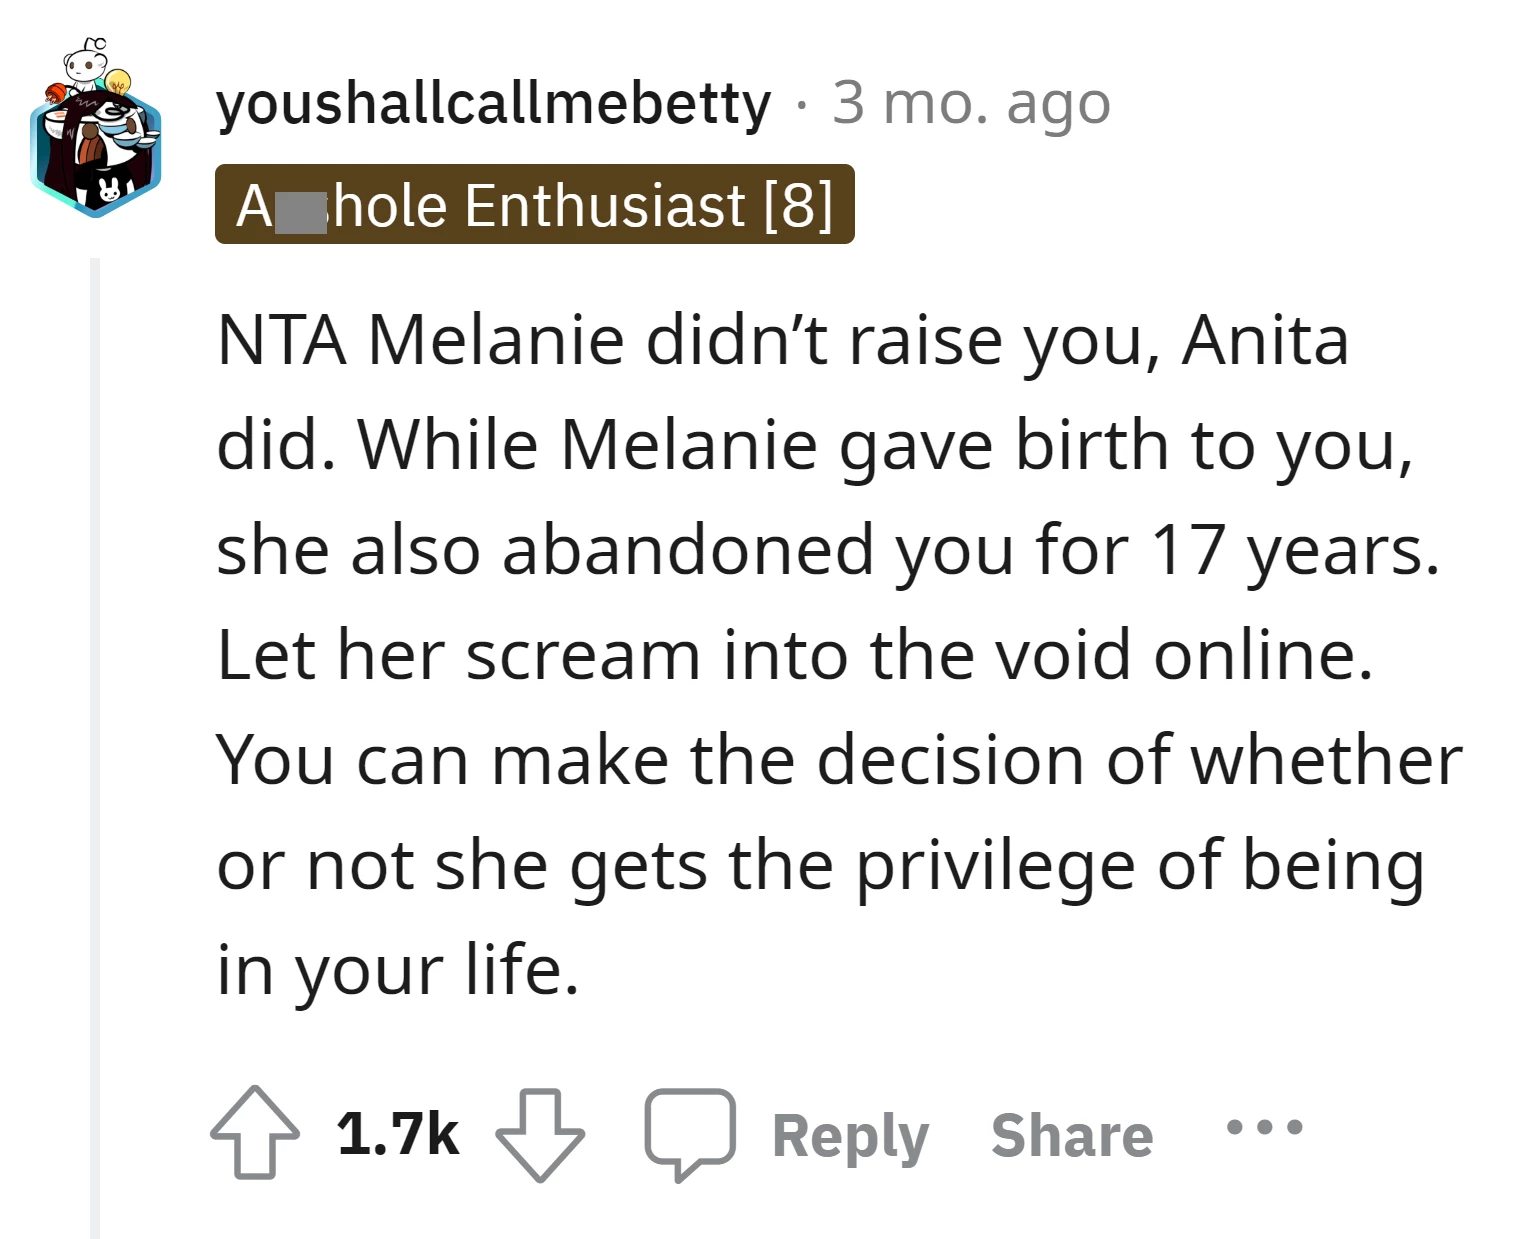 OP has the right to decide whether his bio mom deserves a place in his life